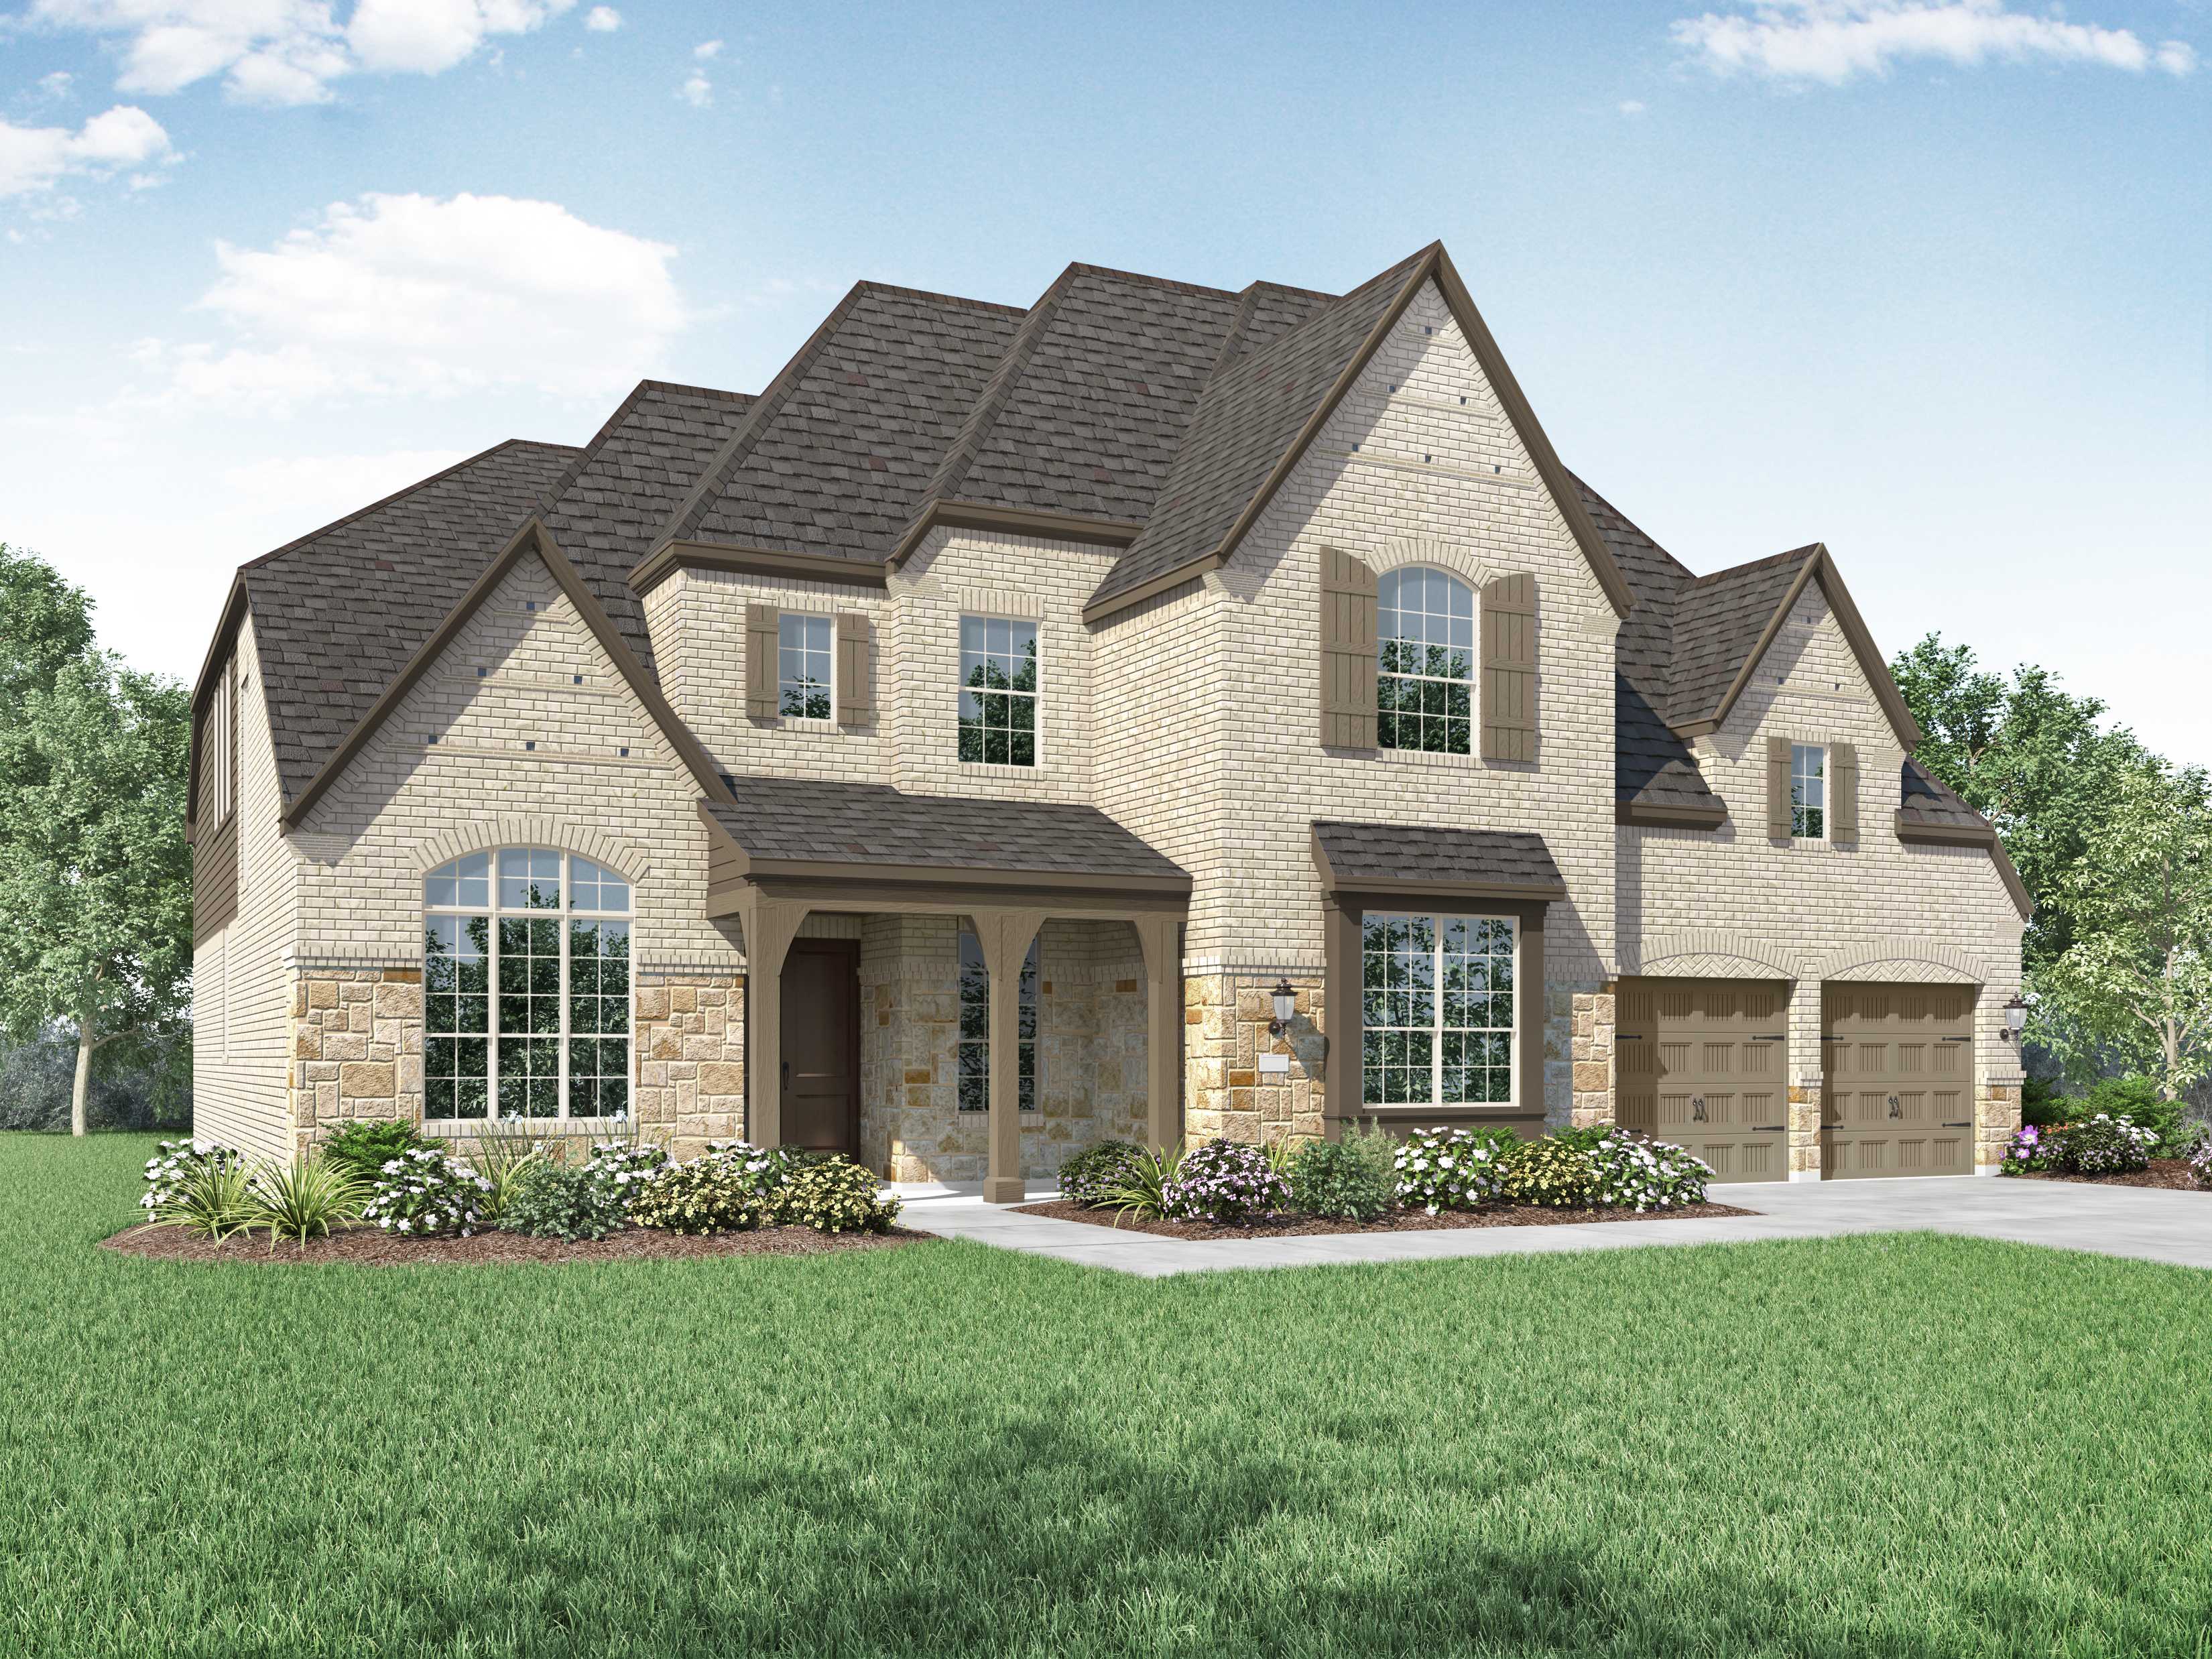 New Home Plan 277 from Highland Homes